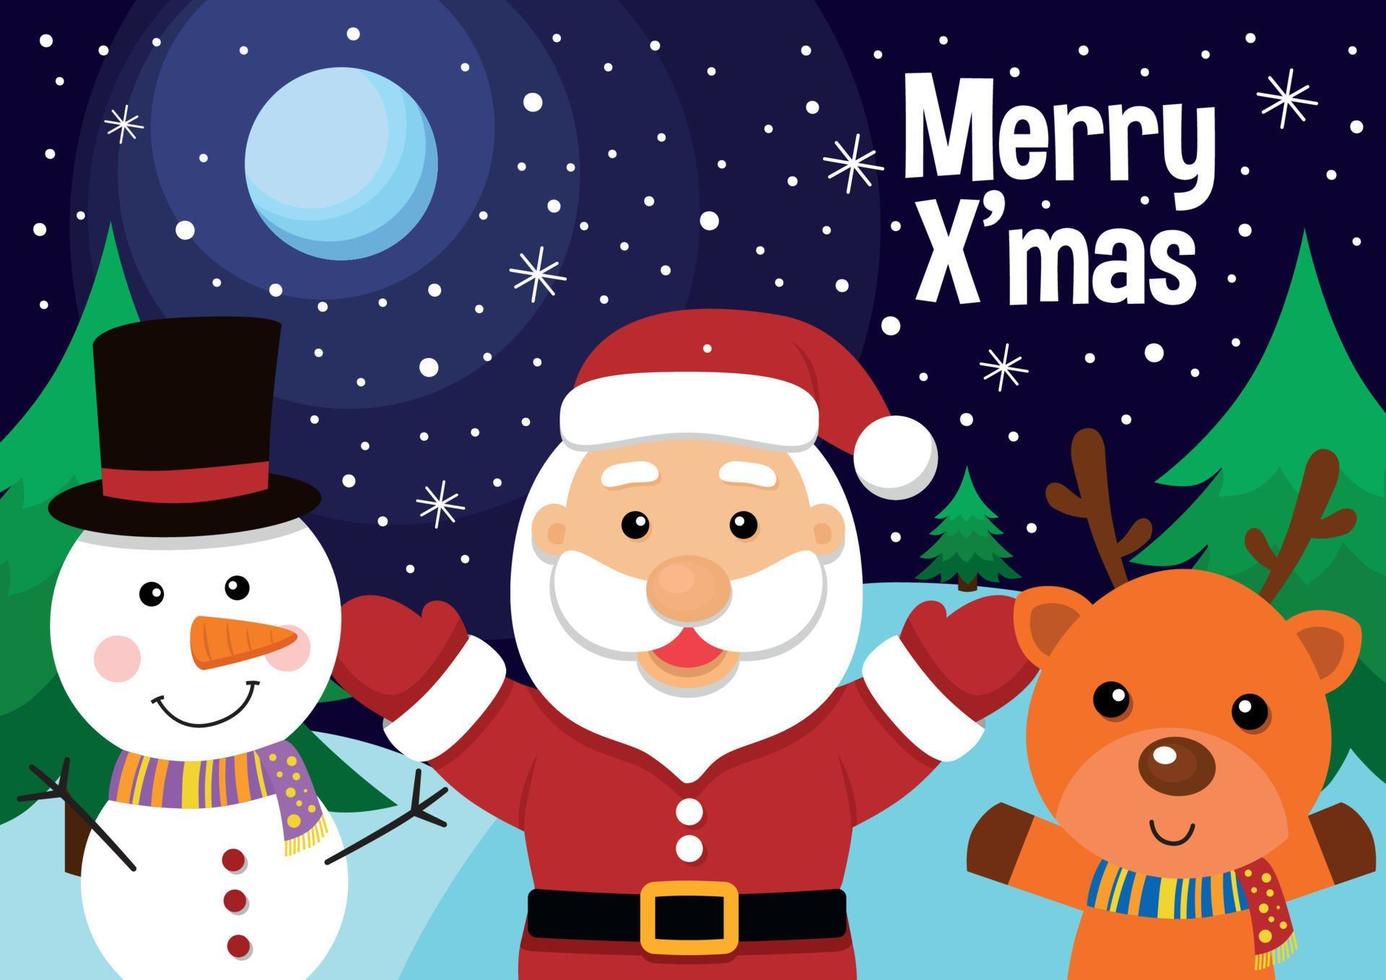 Christmas Greeting Card with Christmas Santa Claus Snowman and reindeer Vector illustration